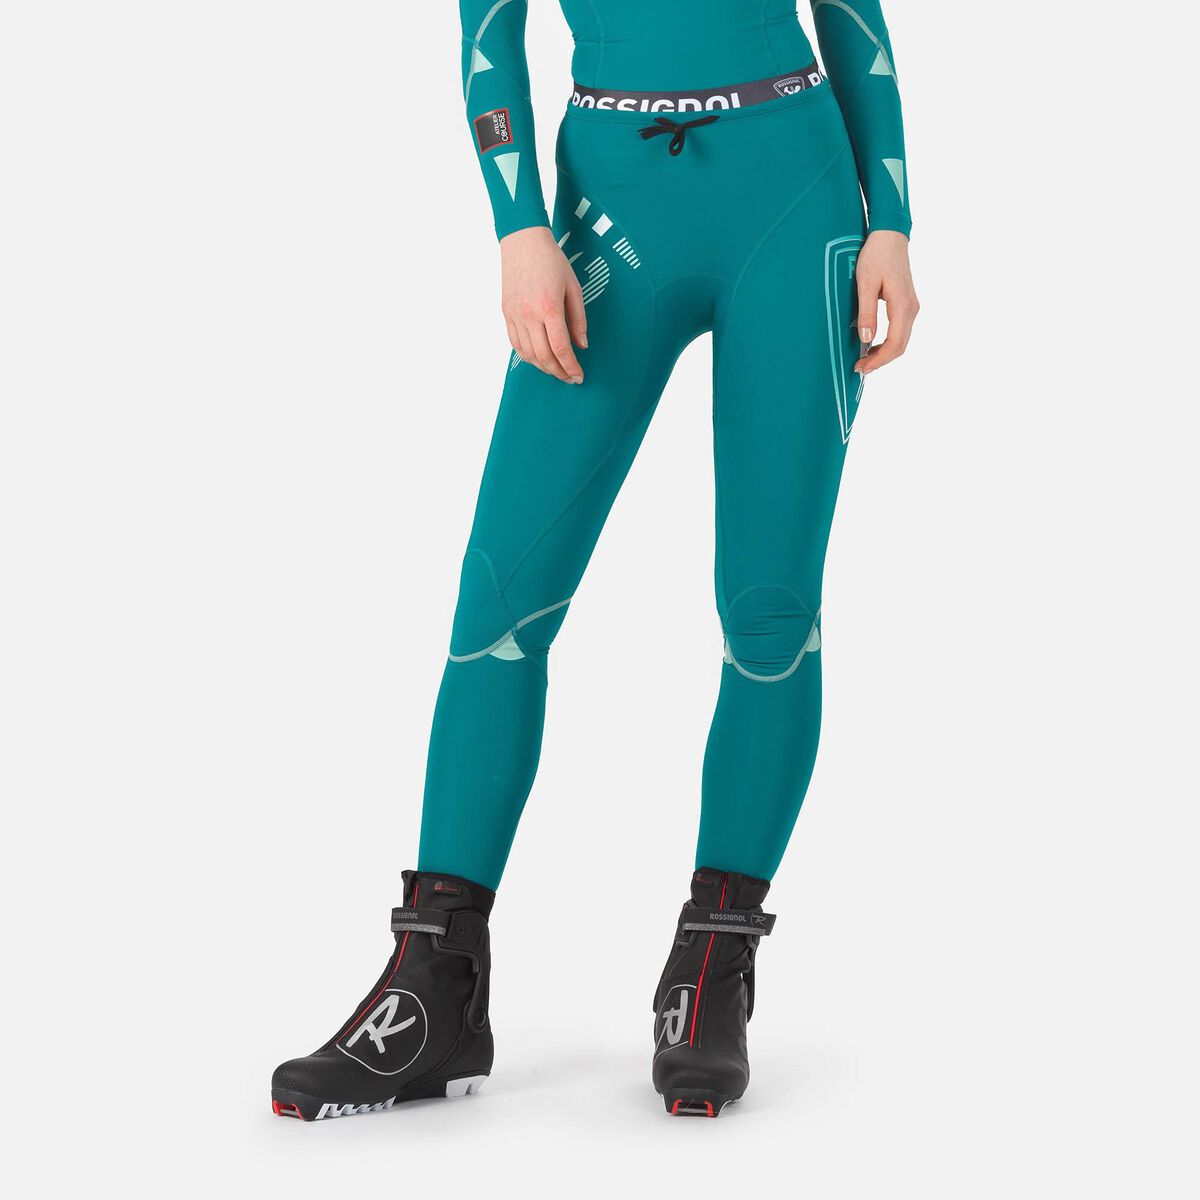 Infini Compression Race Base Layer Tights in Women average savings